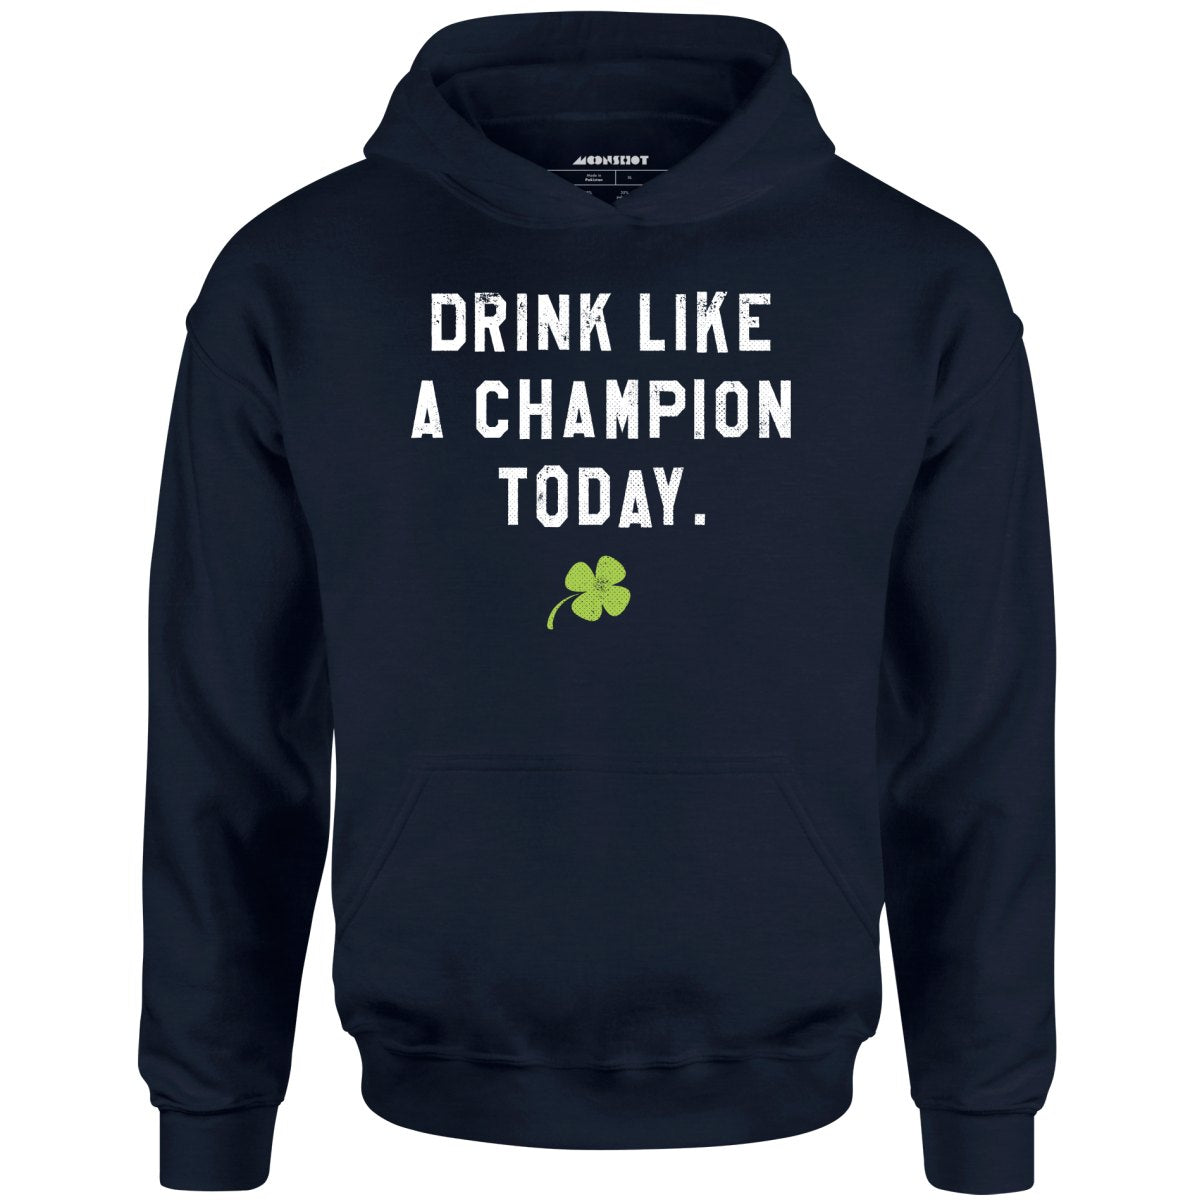 Drink Like a Champion Today - Unisex Hoodie